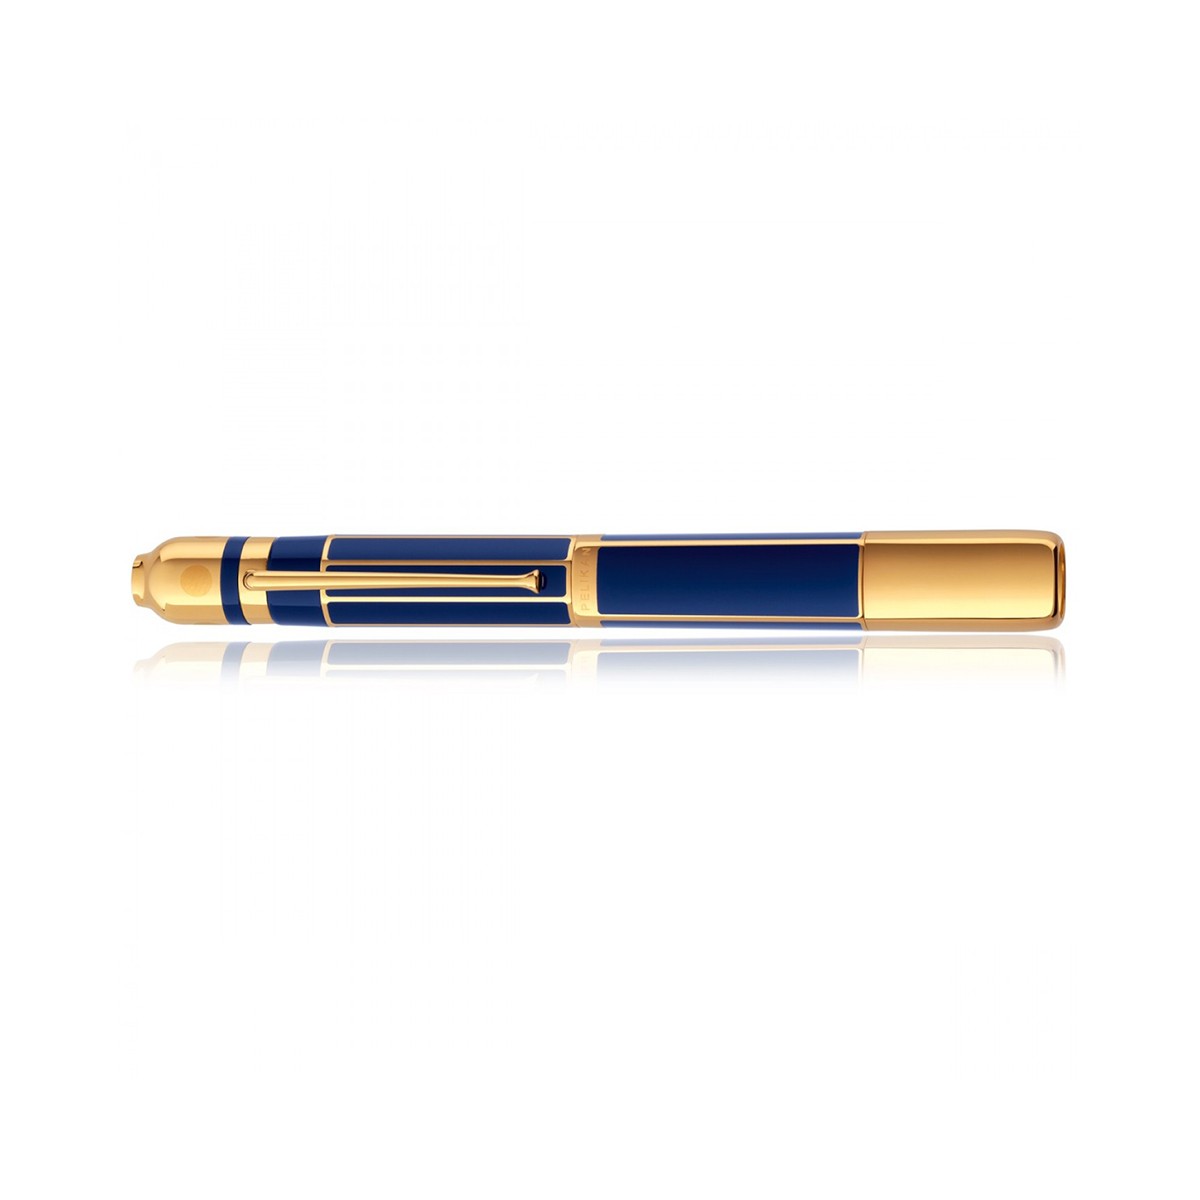 Pelikan Lighthouse of Alexandria Limited Edition Πένα Μ